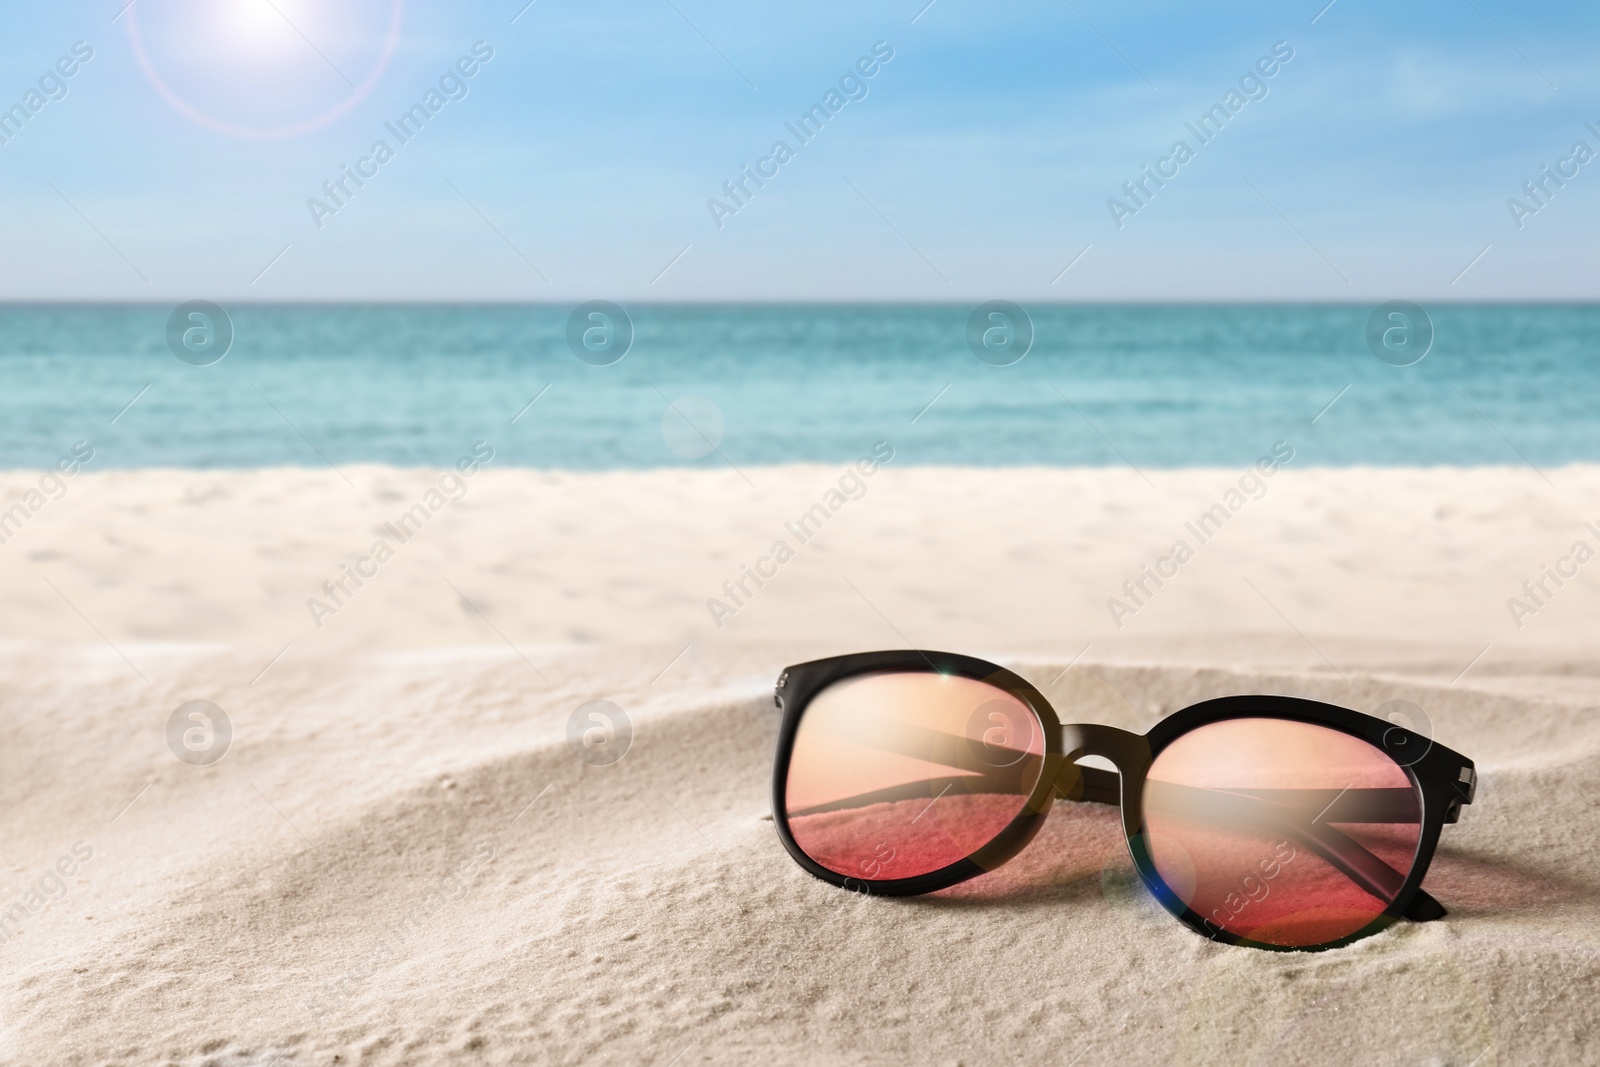 Image of Stylish sunglasses on sandy beach near sea, space for text